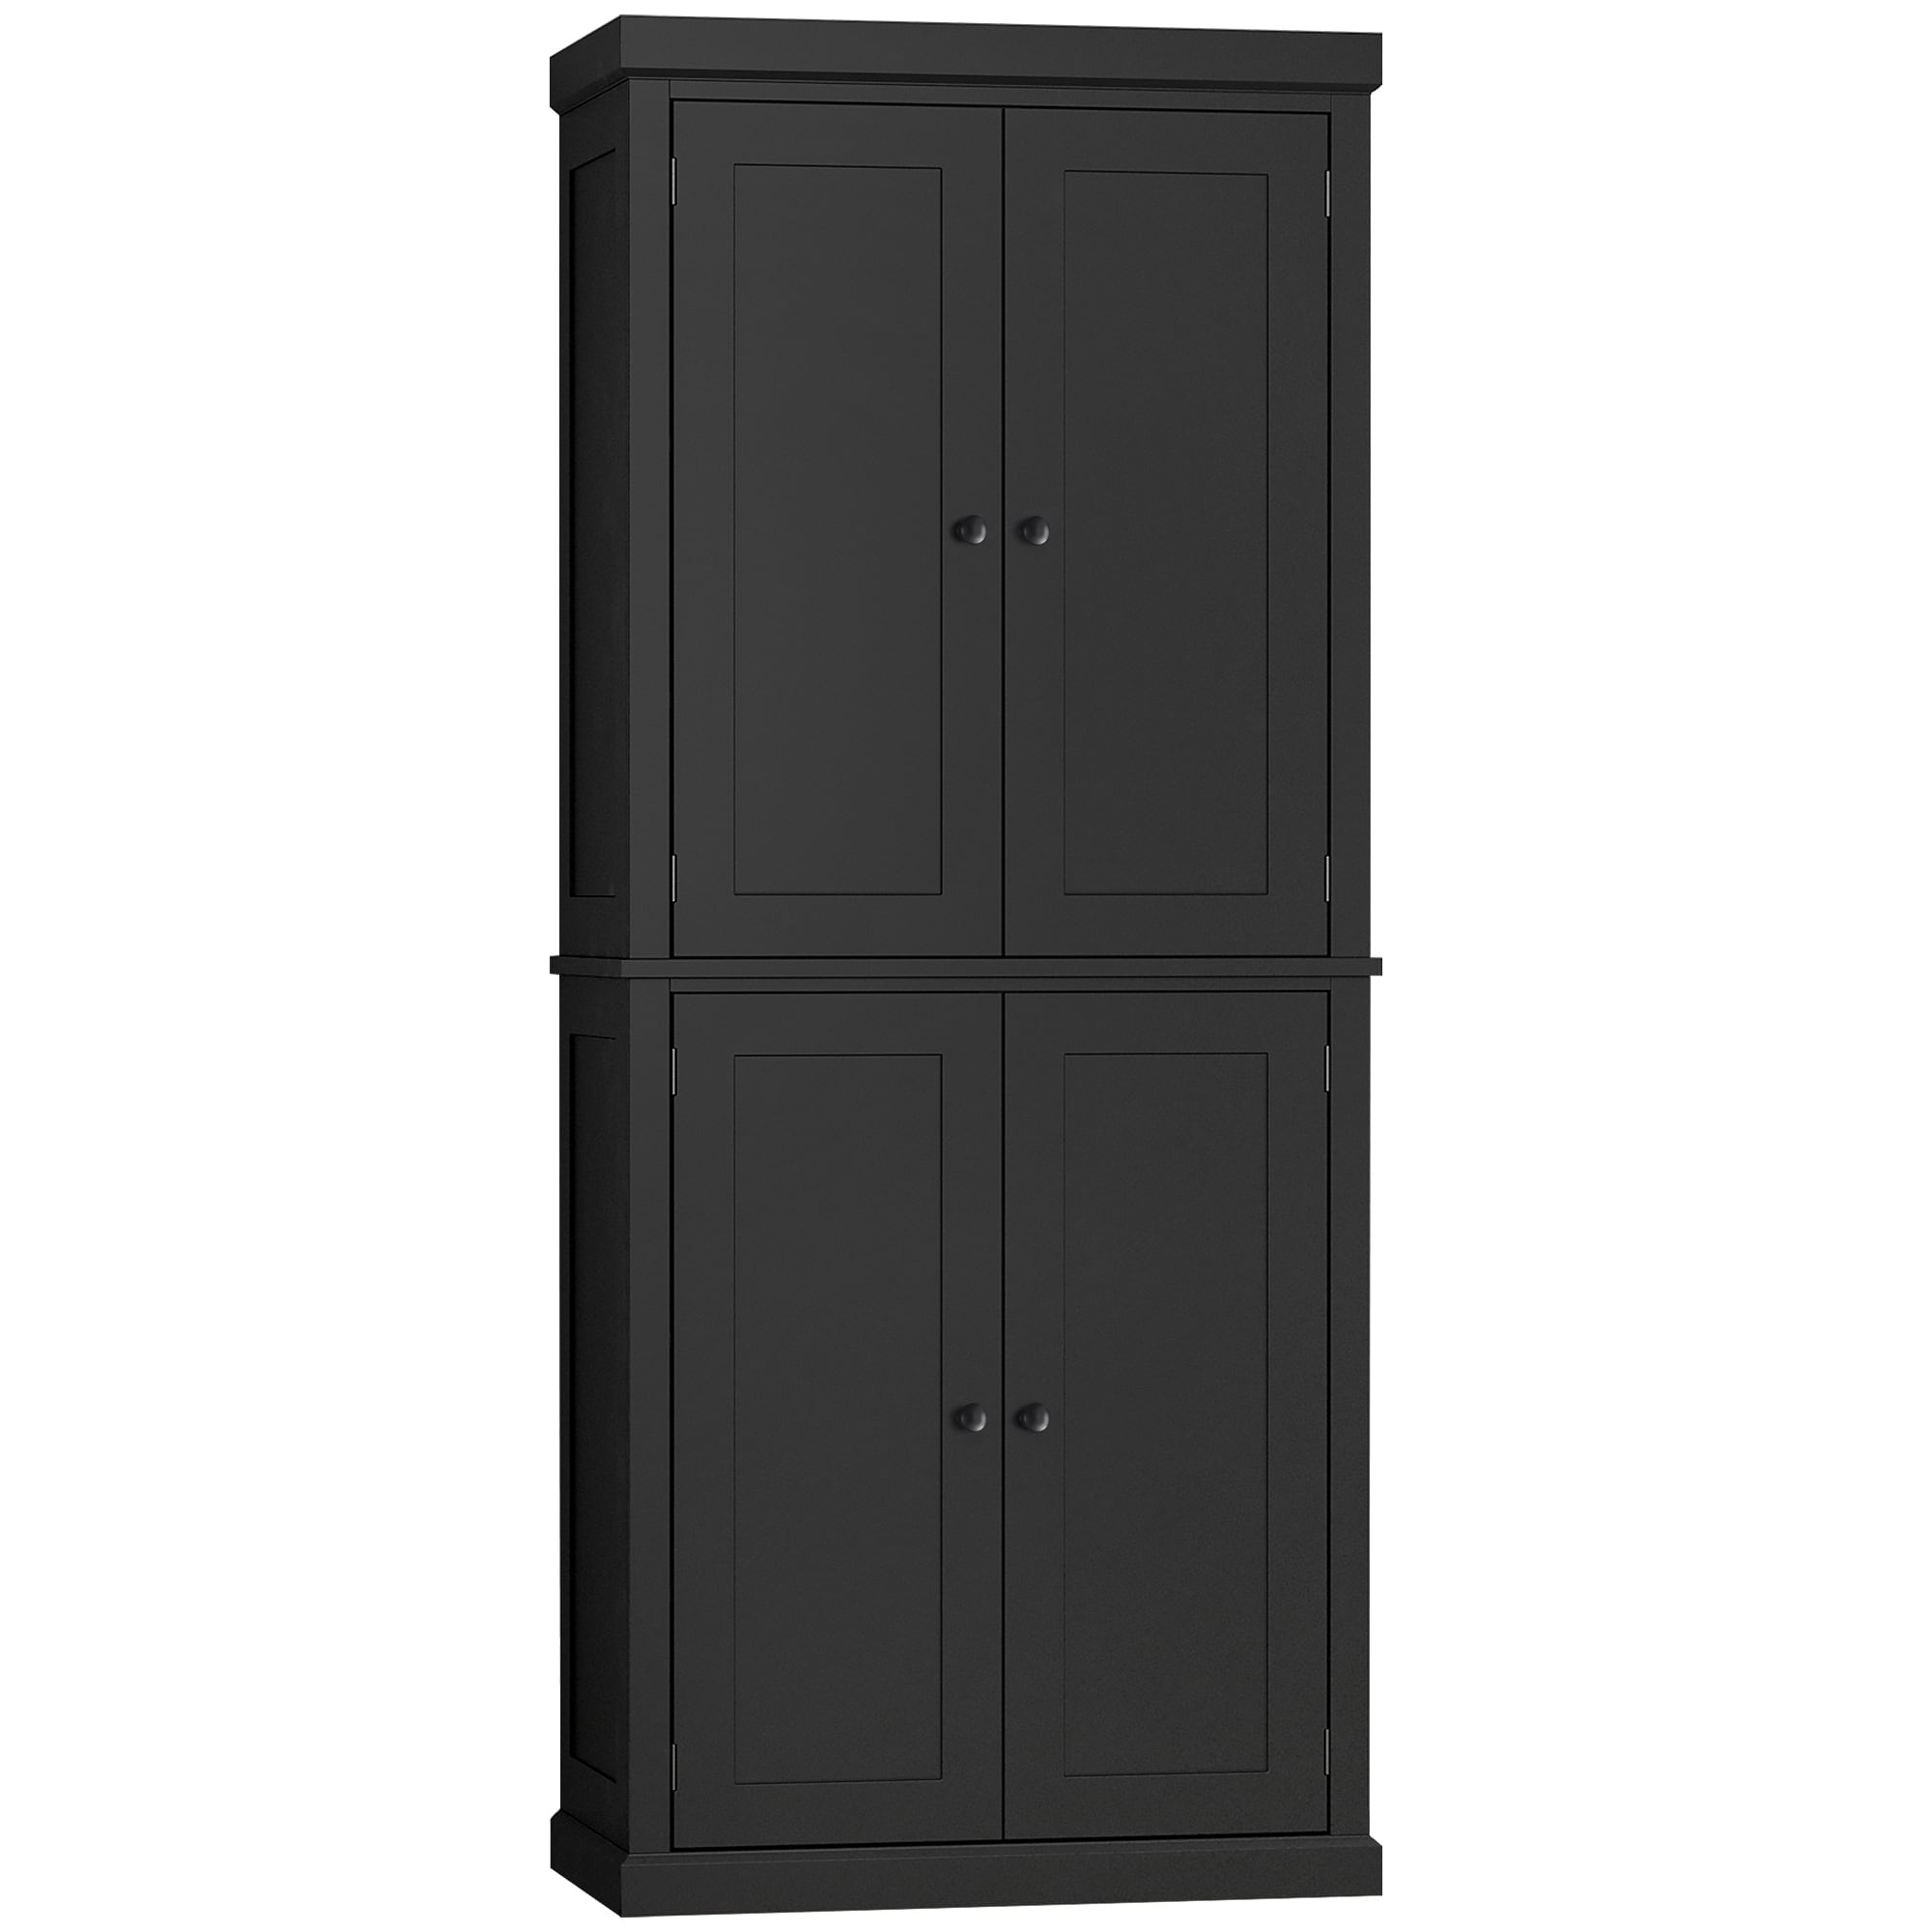 https://ak1.ostkcdn.com/images/products/is/images/direct/166e58aa35ee6889dfda0f4641d0cac59c07930d/HOMCOM-Freestanding-Modern-4-Door-Kitchen-Pantry%2C-Storage-Cabinet-Organizer-with-6-Tier-Shelves%2C-and-4-Adjustable-Shelves%2C-Black.jpg